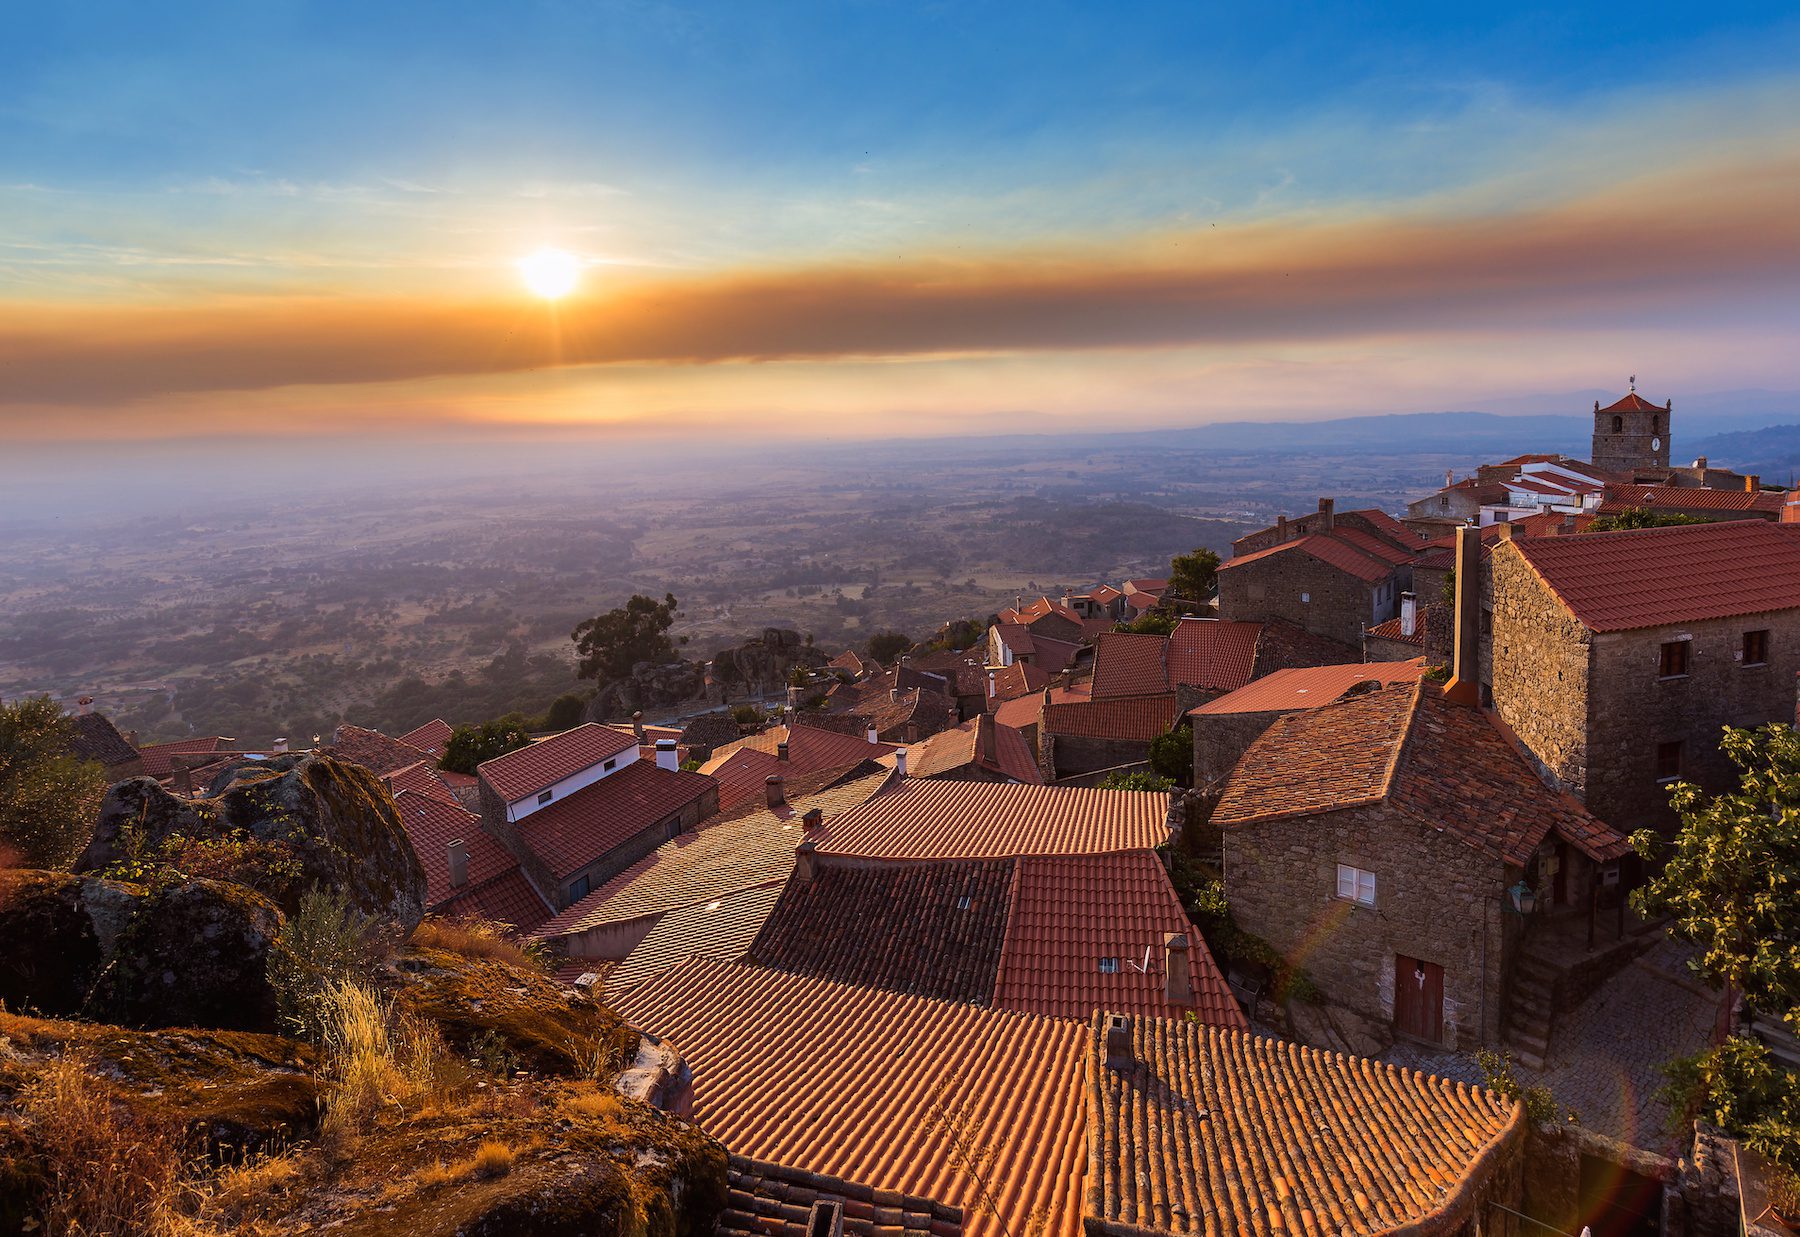 Sweeping hilltop view of Monsanto, Portugal were the sun is beginning to set behind wisps of hazy clouds